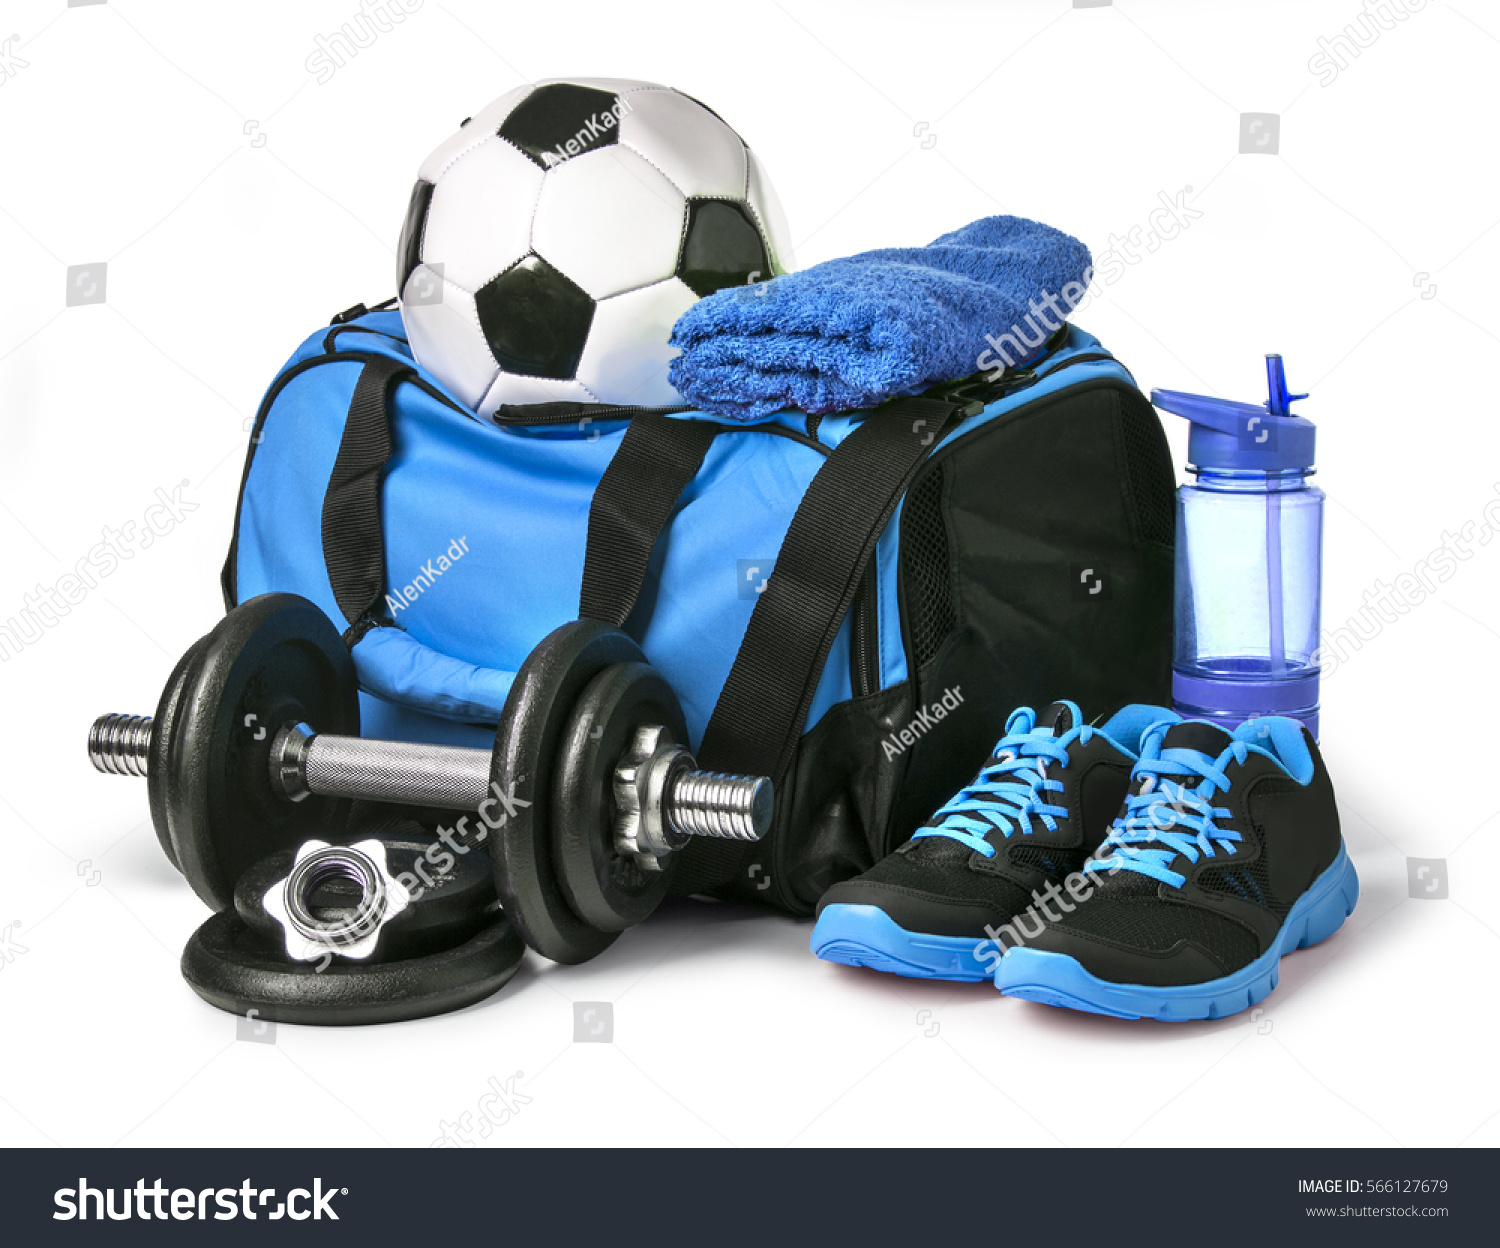 Sports bag with sports equipment isolated on white with clipping path #566127679